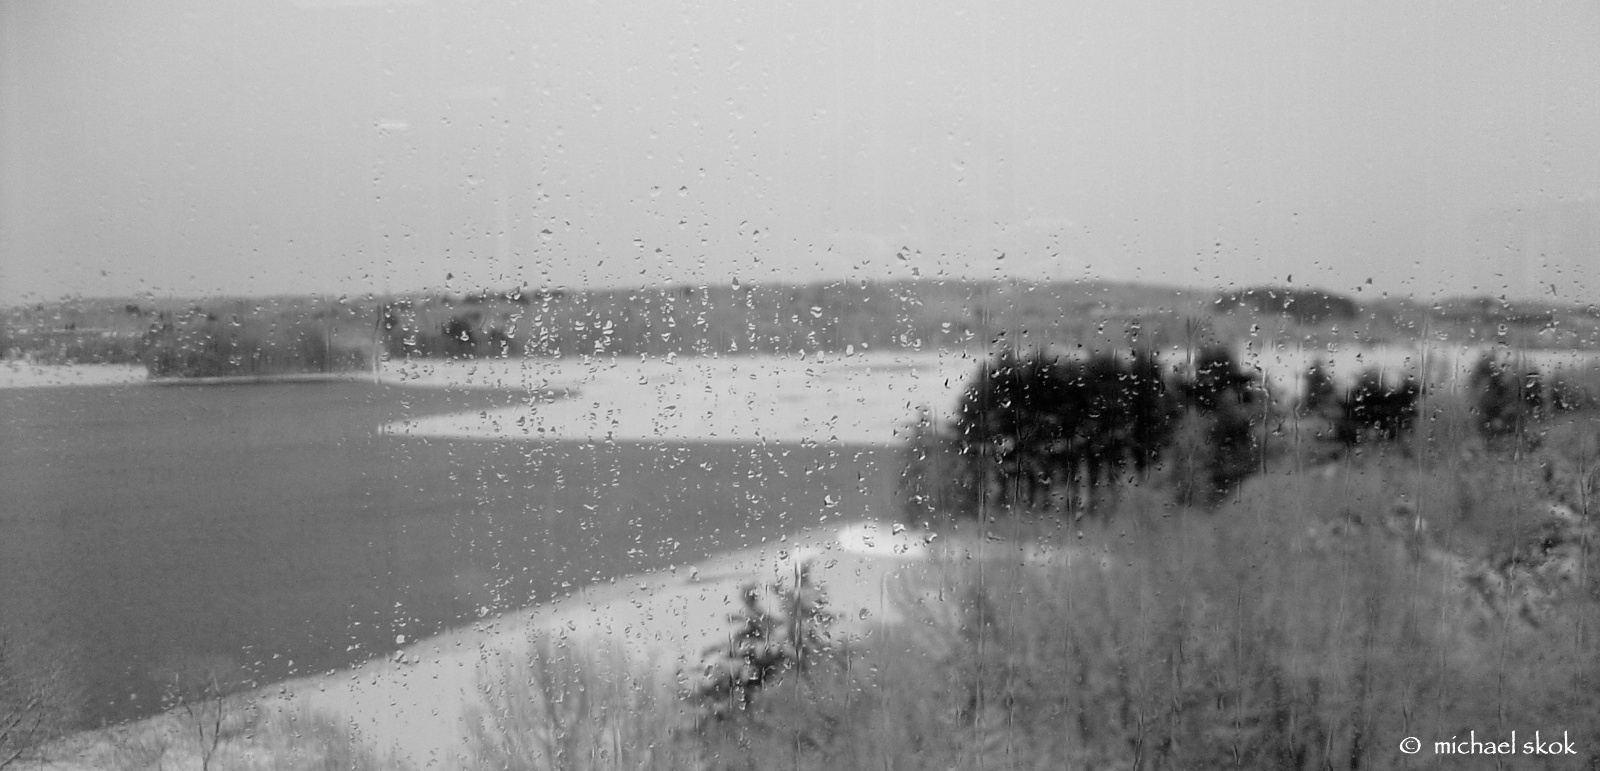 From my office window - one cold rainy day!